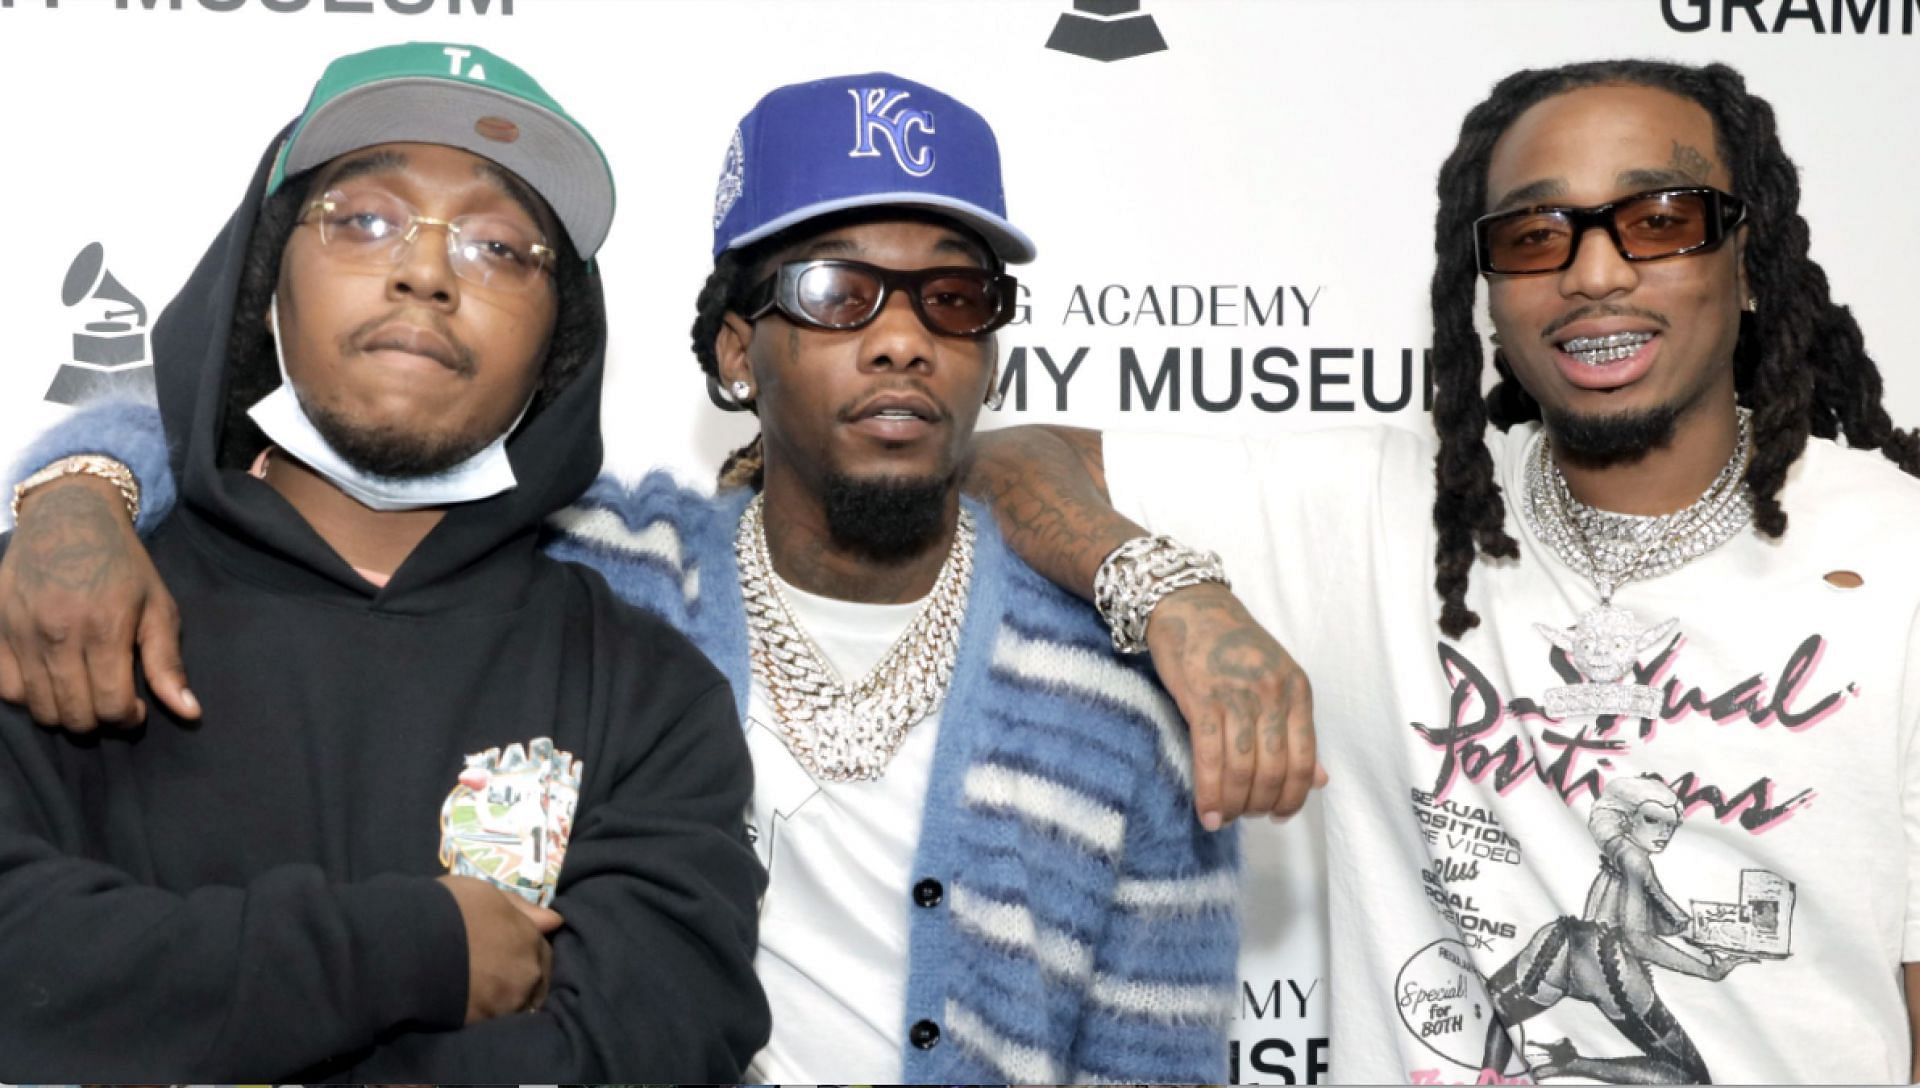 Fans in tears after seeing pictures of Offset and Quavo crying at Takeoff